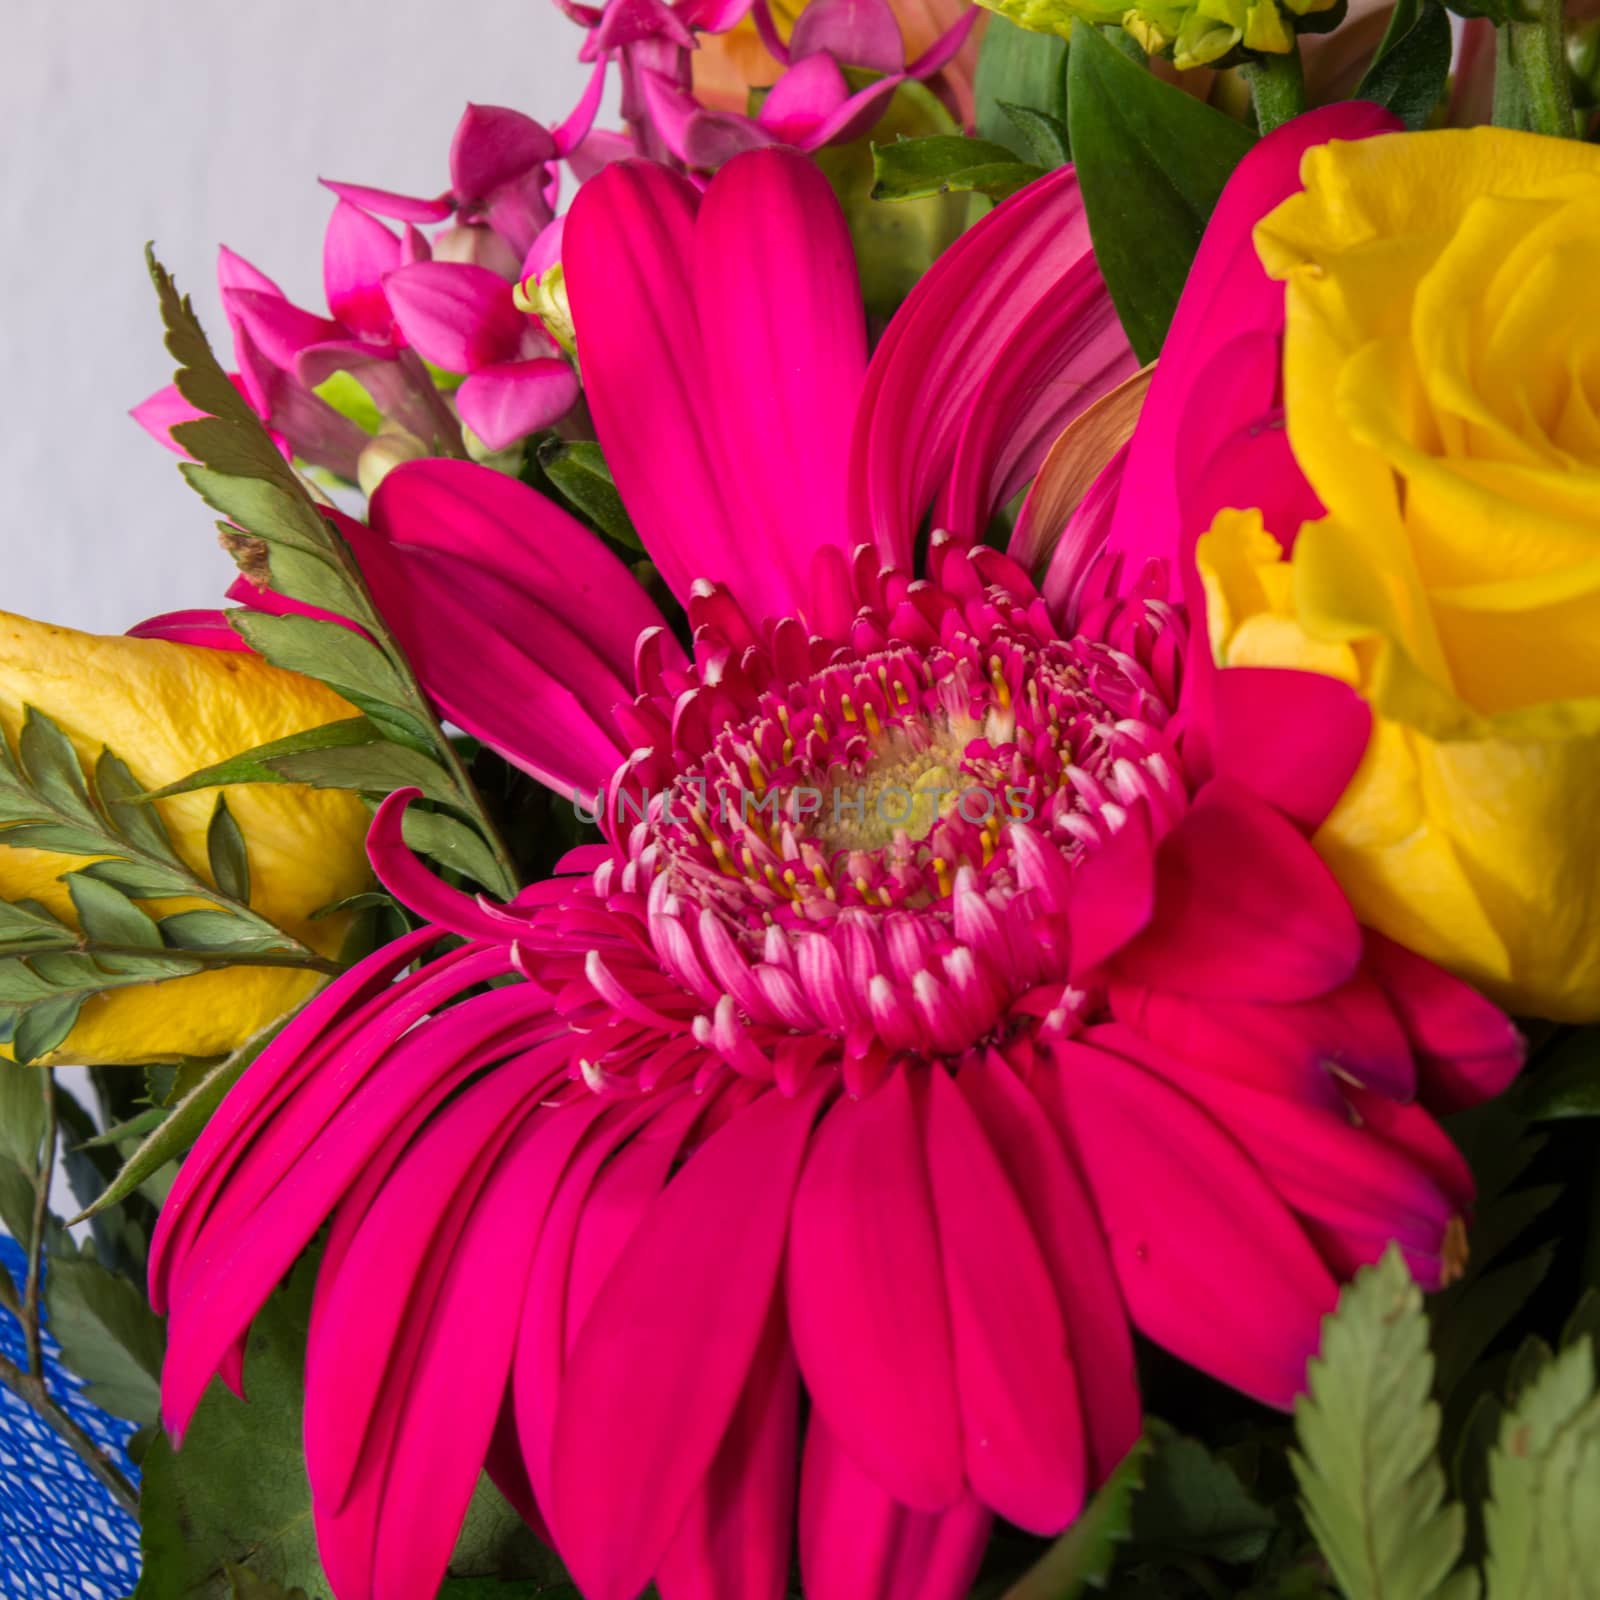 Bouquet of various colorful flowers by enrico.lapponi